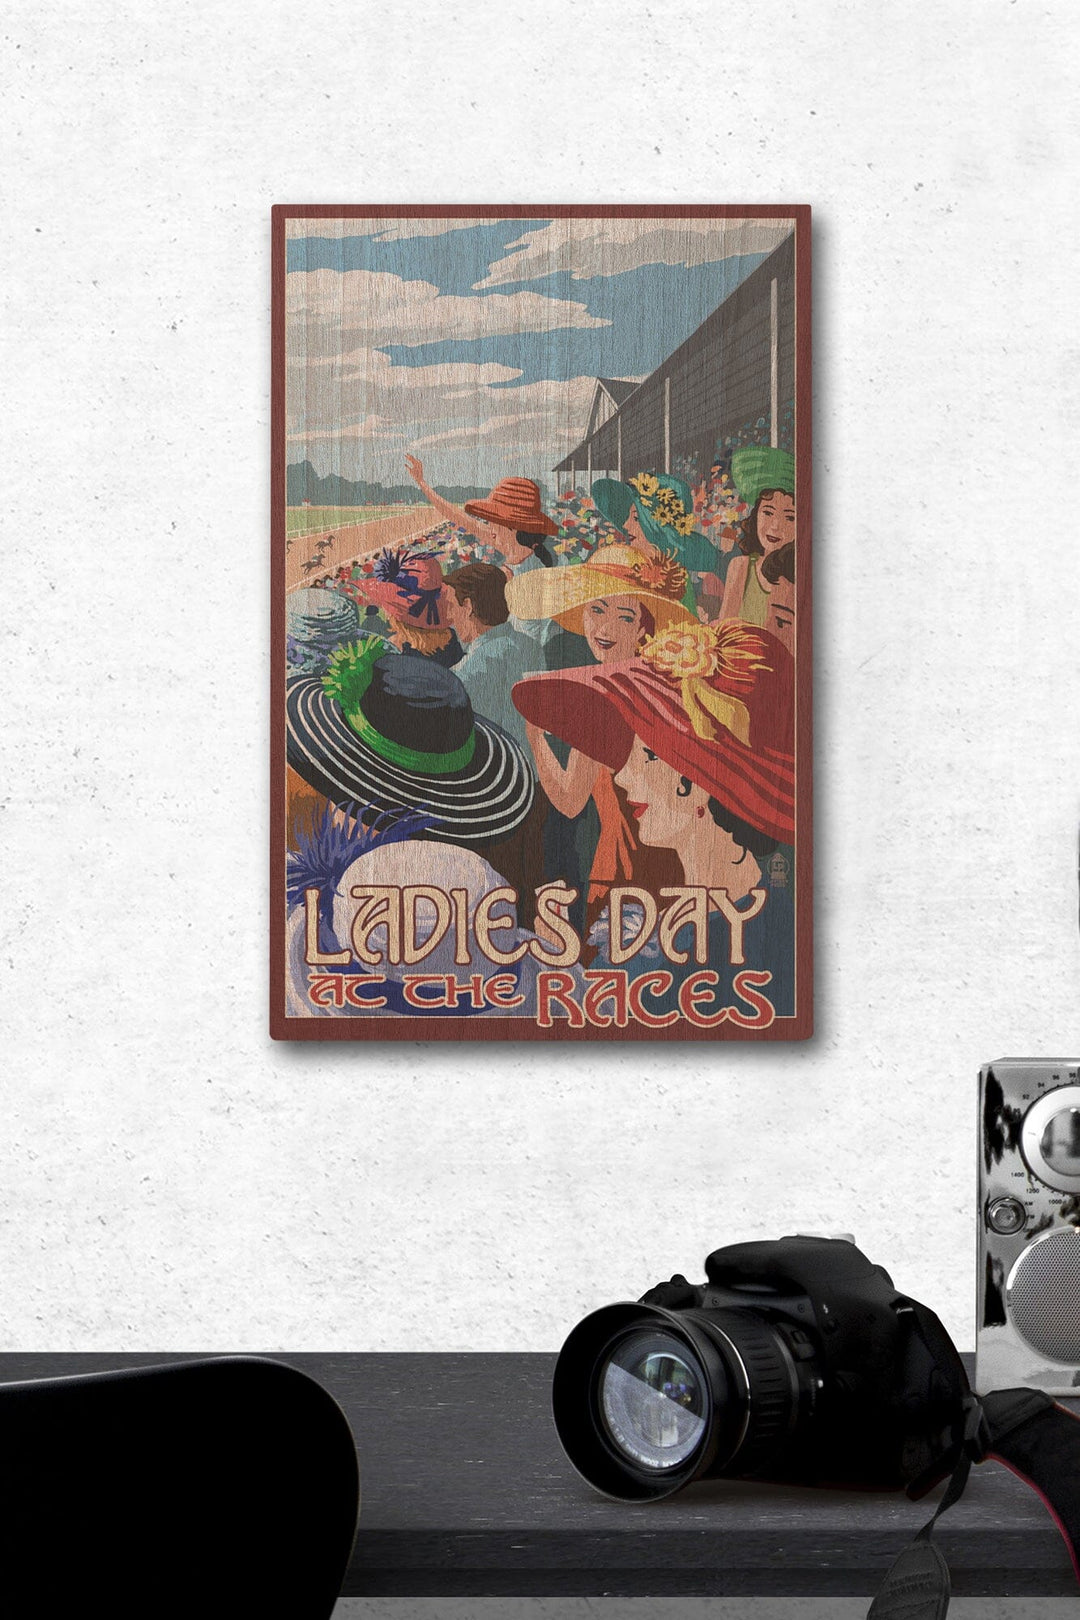 Kentucky, Ladies Day at the Track Horse Racing, Lantern Press Artwork, Wood Signs and Postcards Wood Lantern Press 12 x 18 Wood Gallery Print 